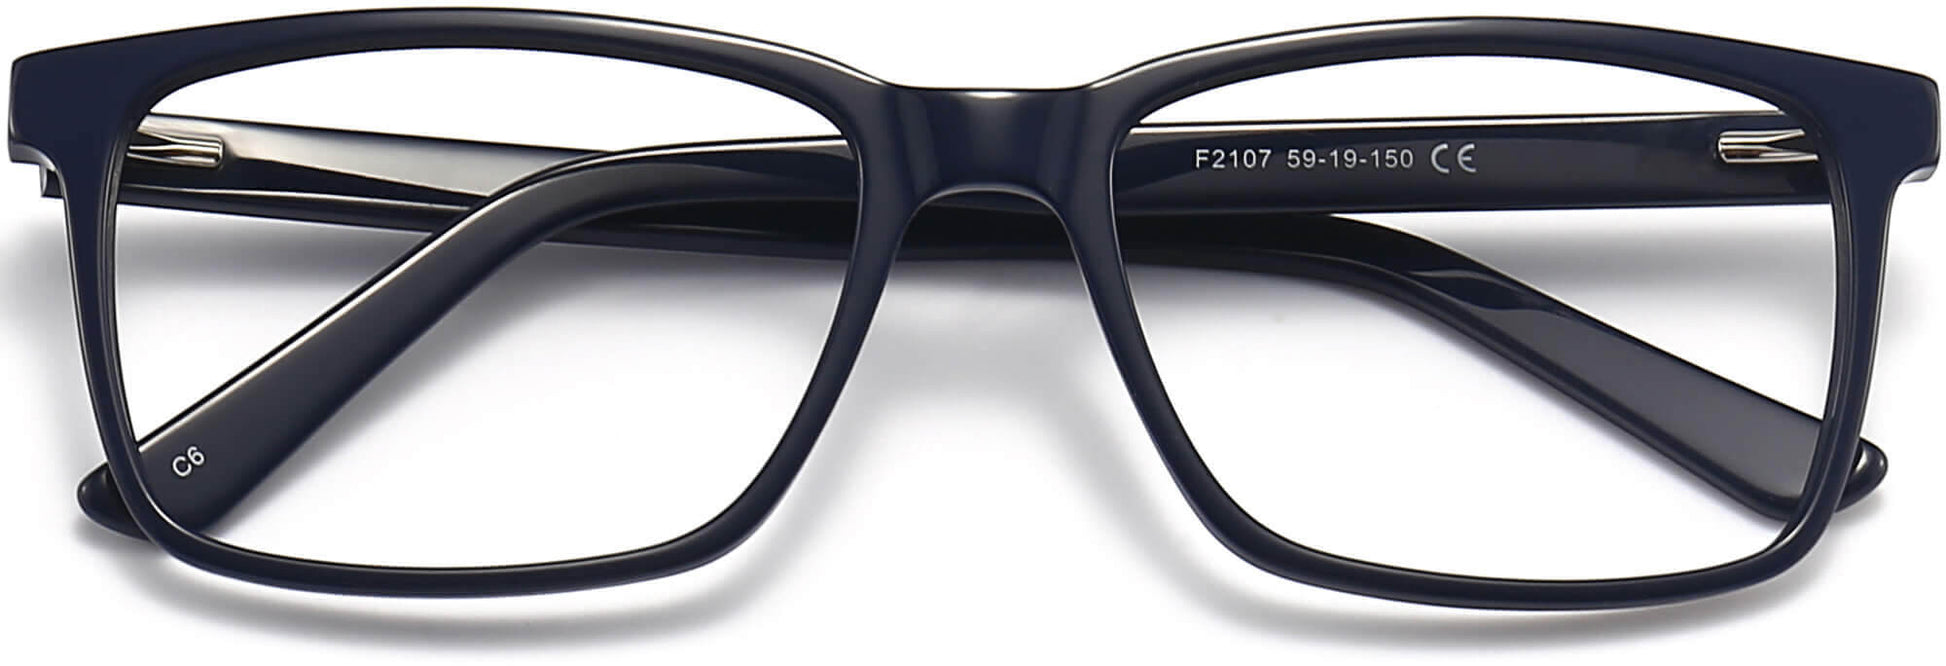 Hendrix Rectangle Black Eyeglasses from ANRRI, closed view